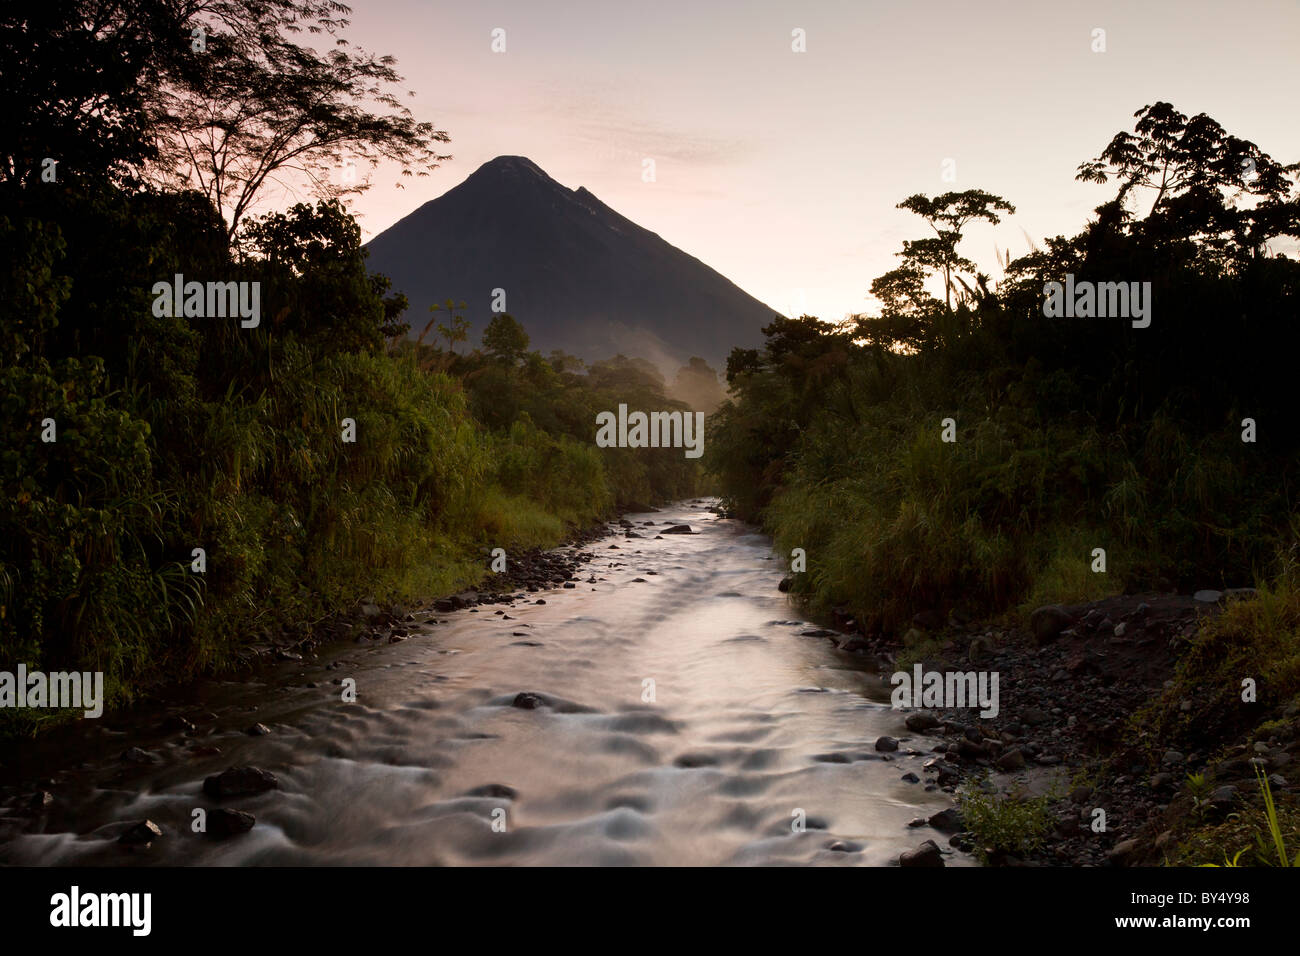 Sunrise at Tabacon river and Costa Rica's most active volcano The Arenal Volcano in Arenal National Park, Alajuela, Costa Rica. Stock Photo